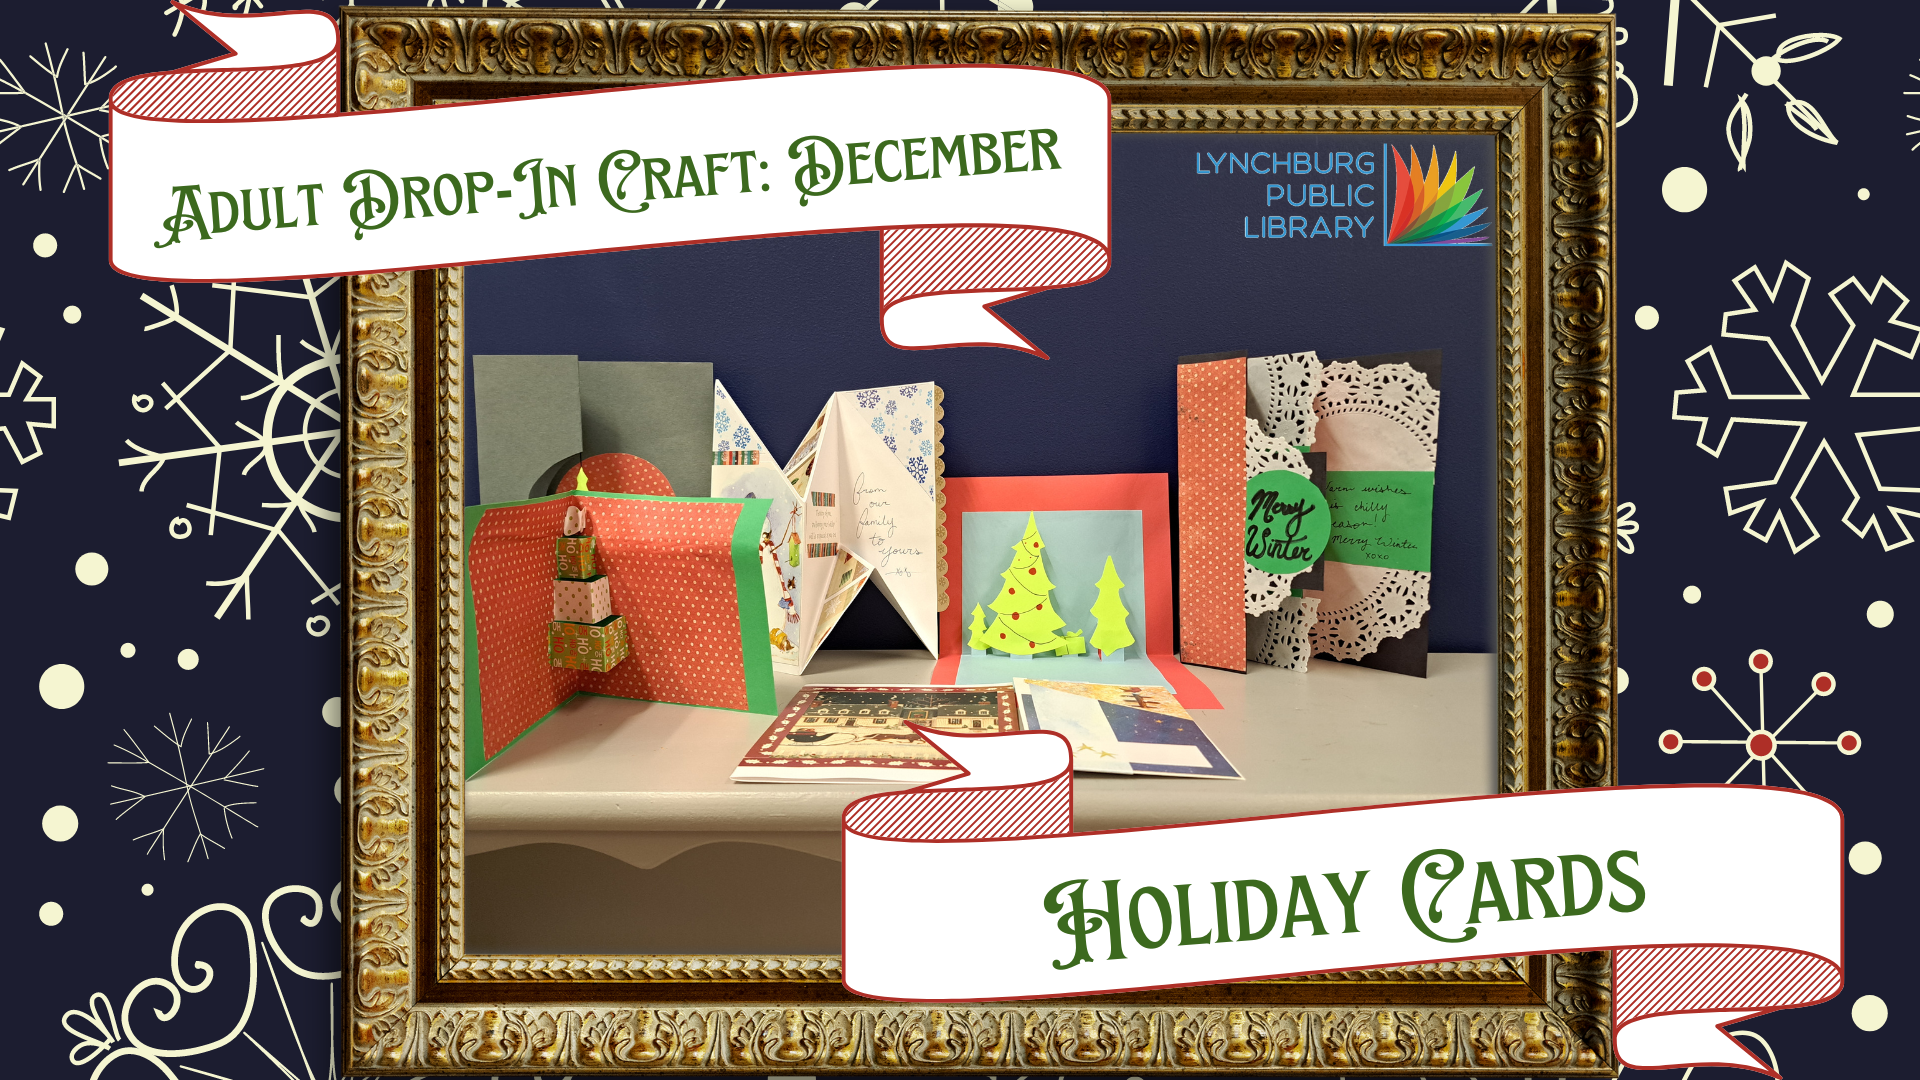 Adult Drop-In Craft: December; Holiday Cards